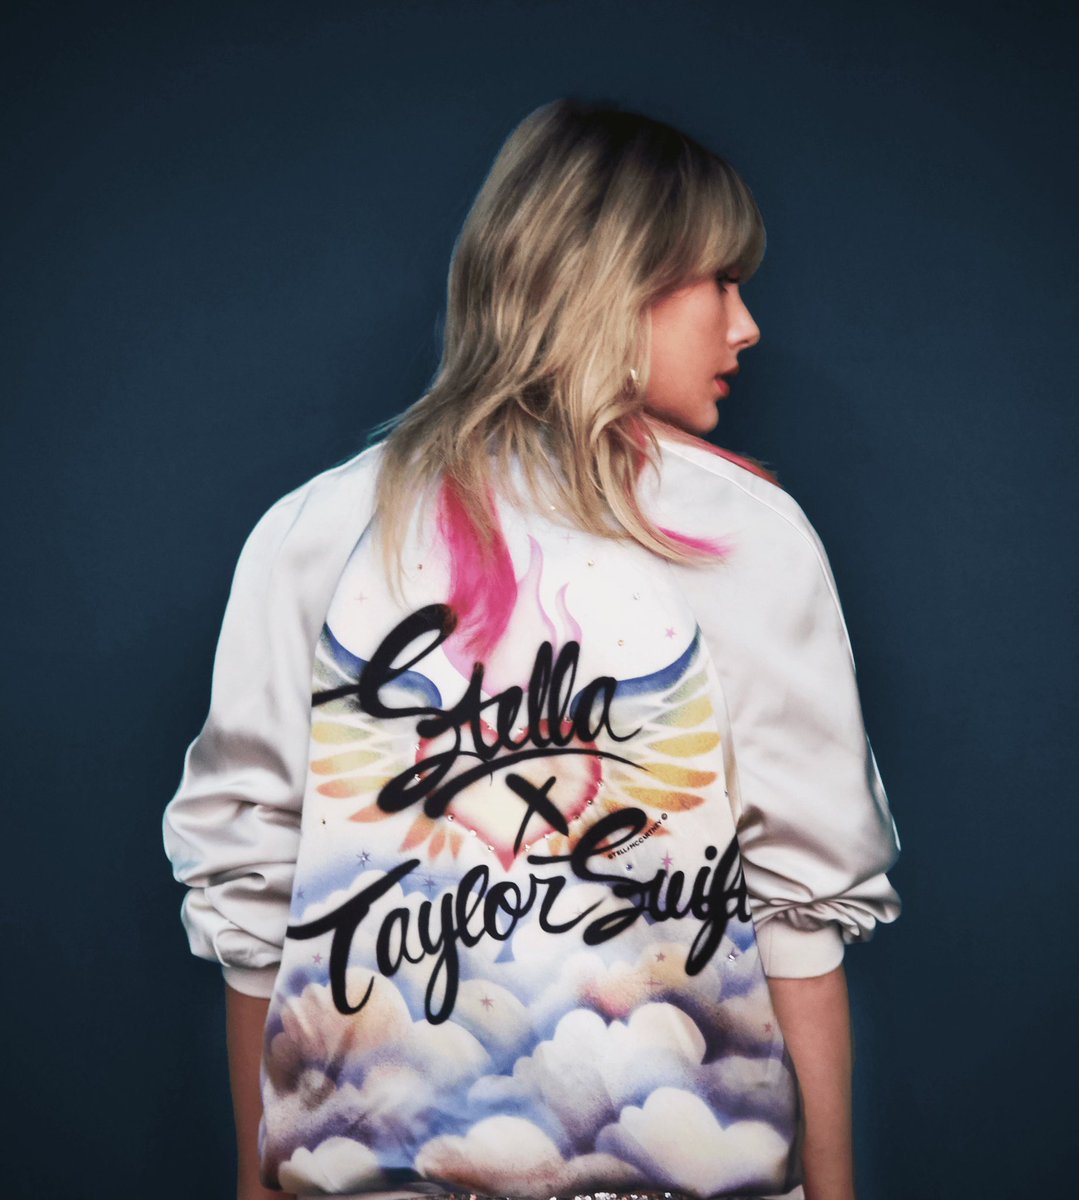 Stella x Taylor Collection - 8/13